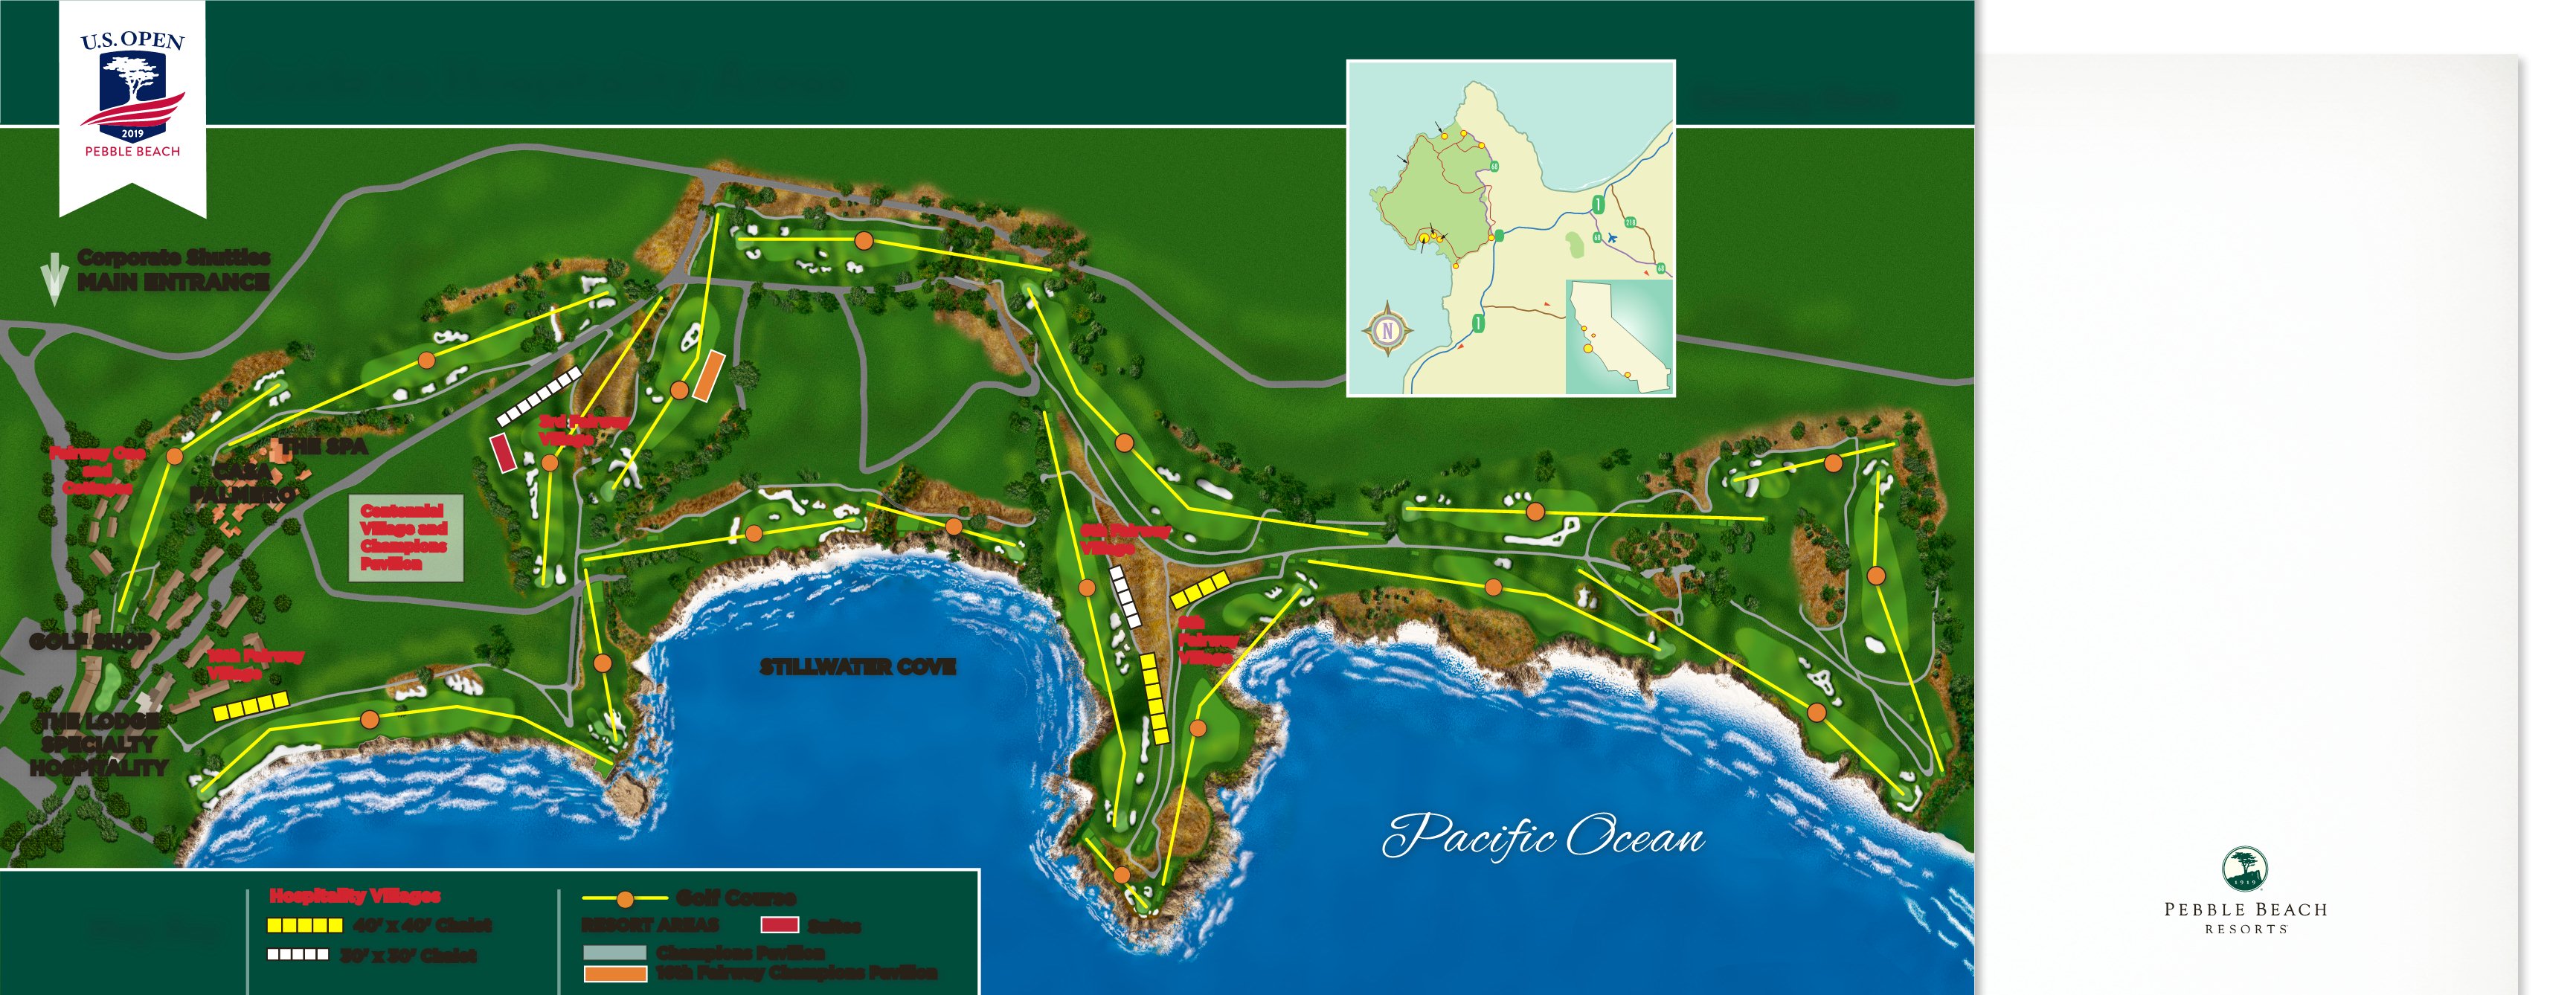 pebble beach golf course locations map